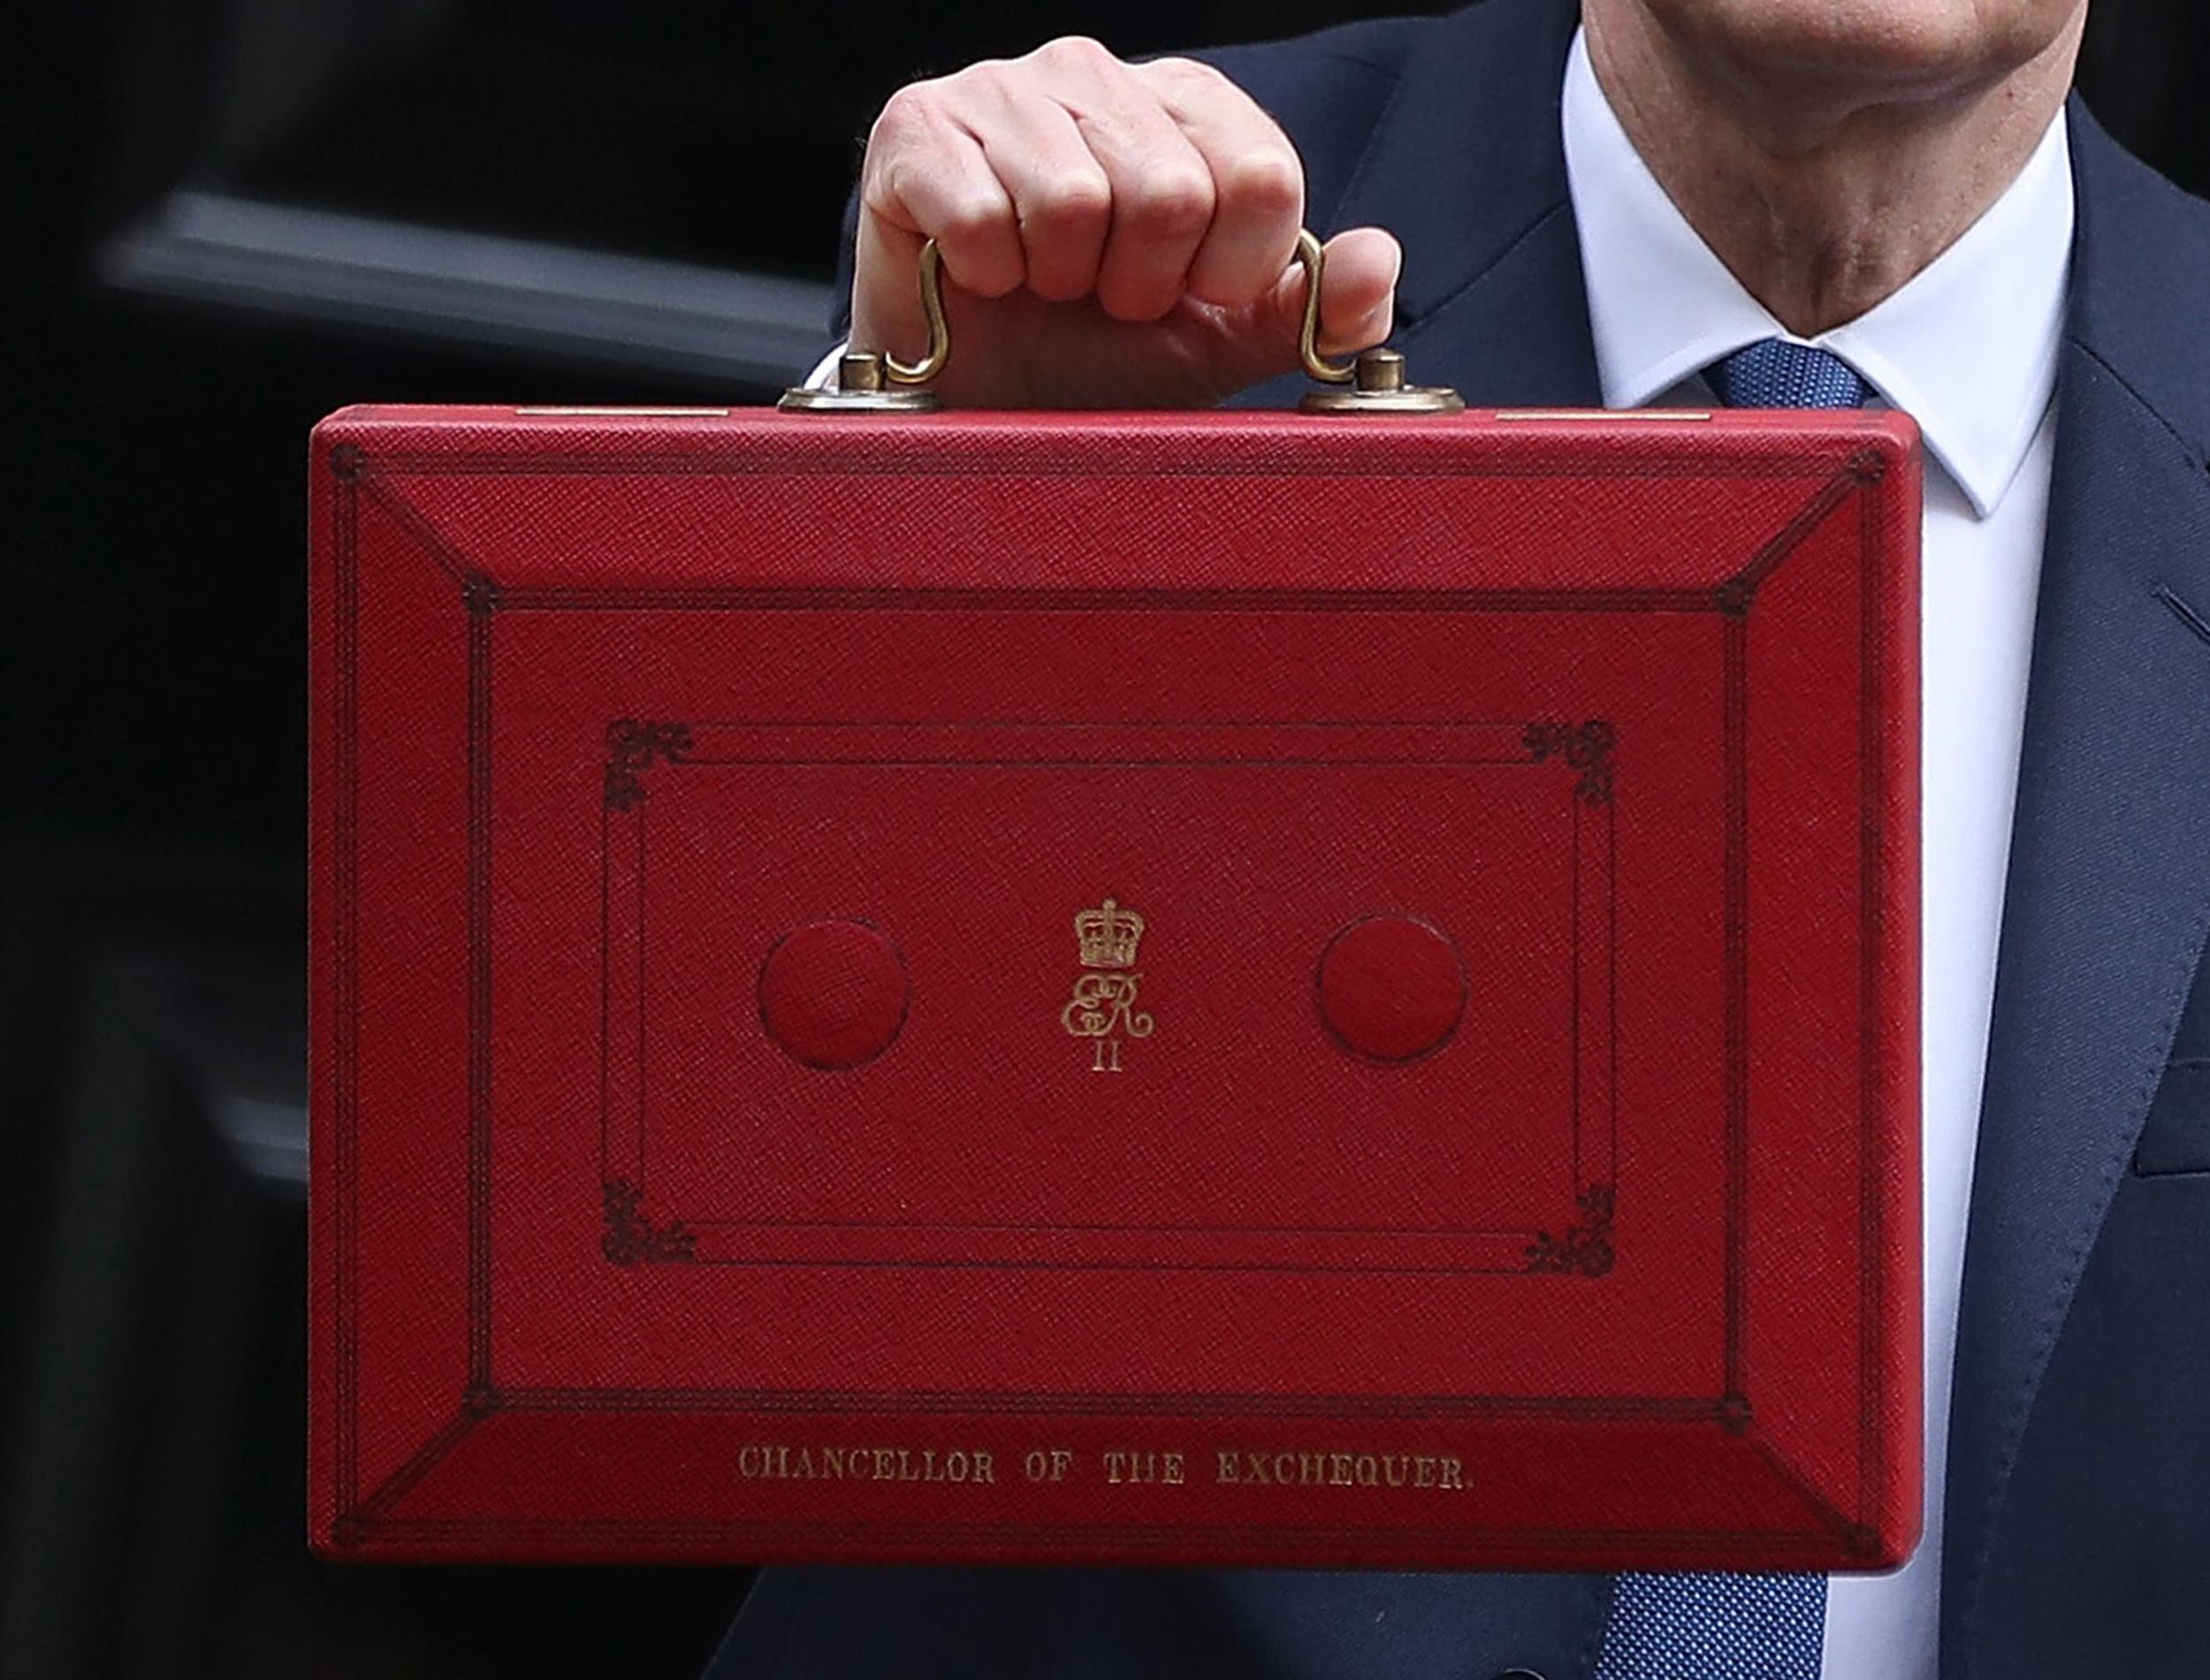 Chancellor of the Exchequer Philip Hammond holds the budget box up to the media as he leaves 11 Downing Street on March 8, 2017 in London, England